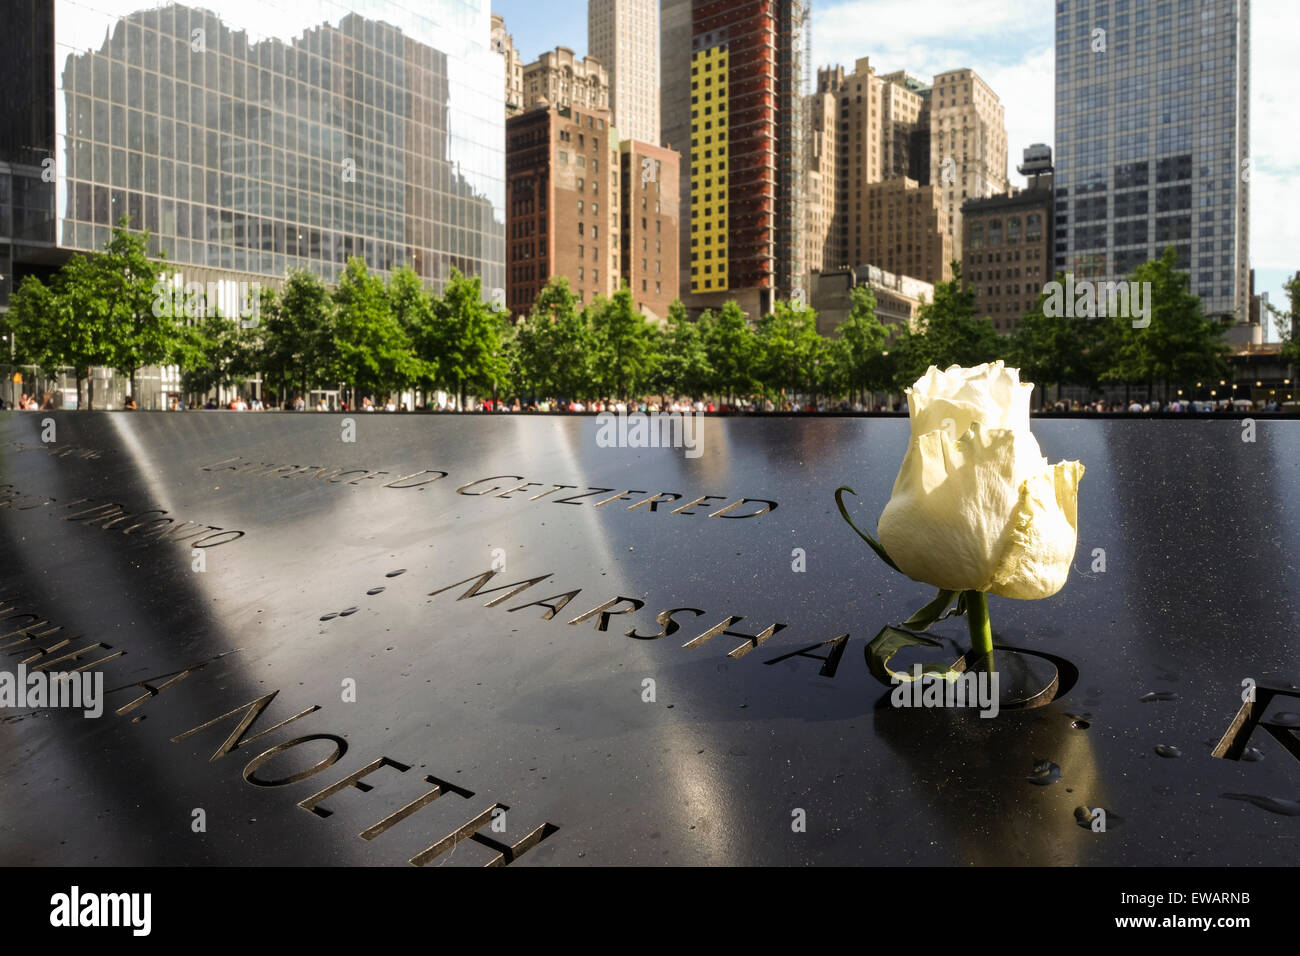 Names engraved in bronze plates with rose at National September 11 Memorial & Museum, New york city, USA. Stock Photo